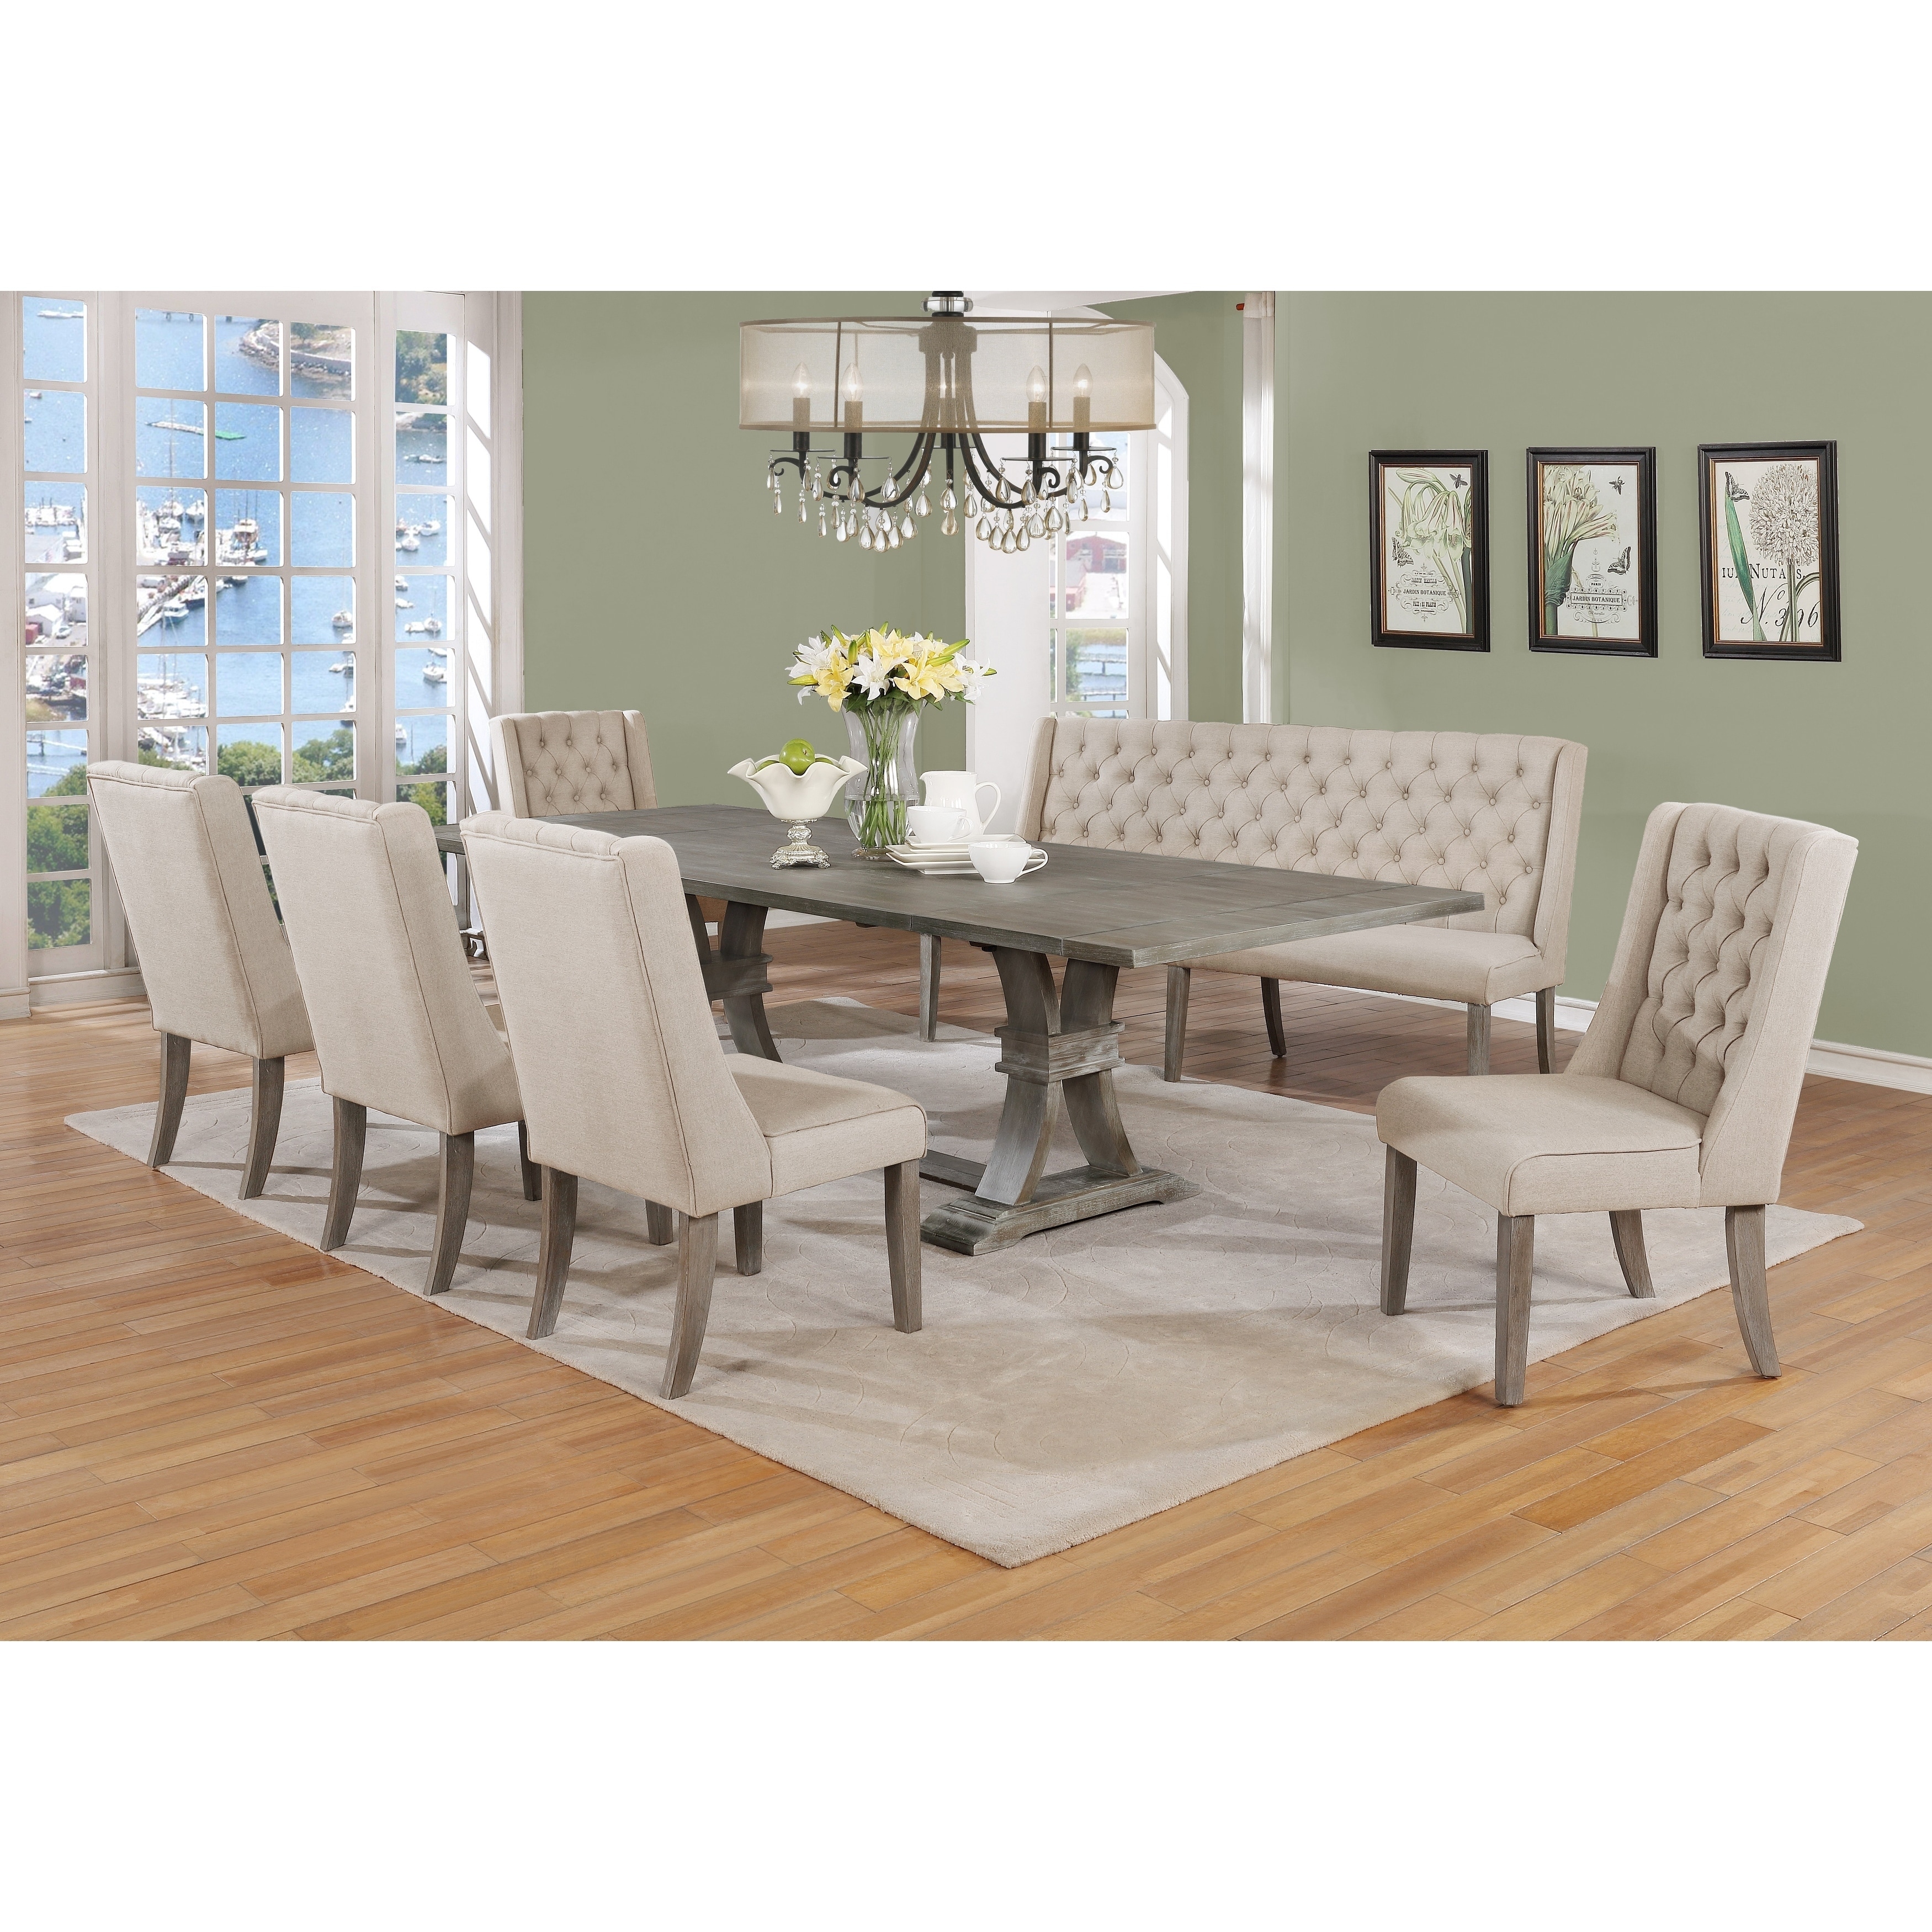 Best Quality Furniture Extending Rustic Grey 7 Piece Dining Set